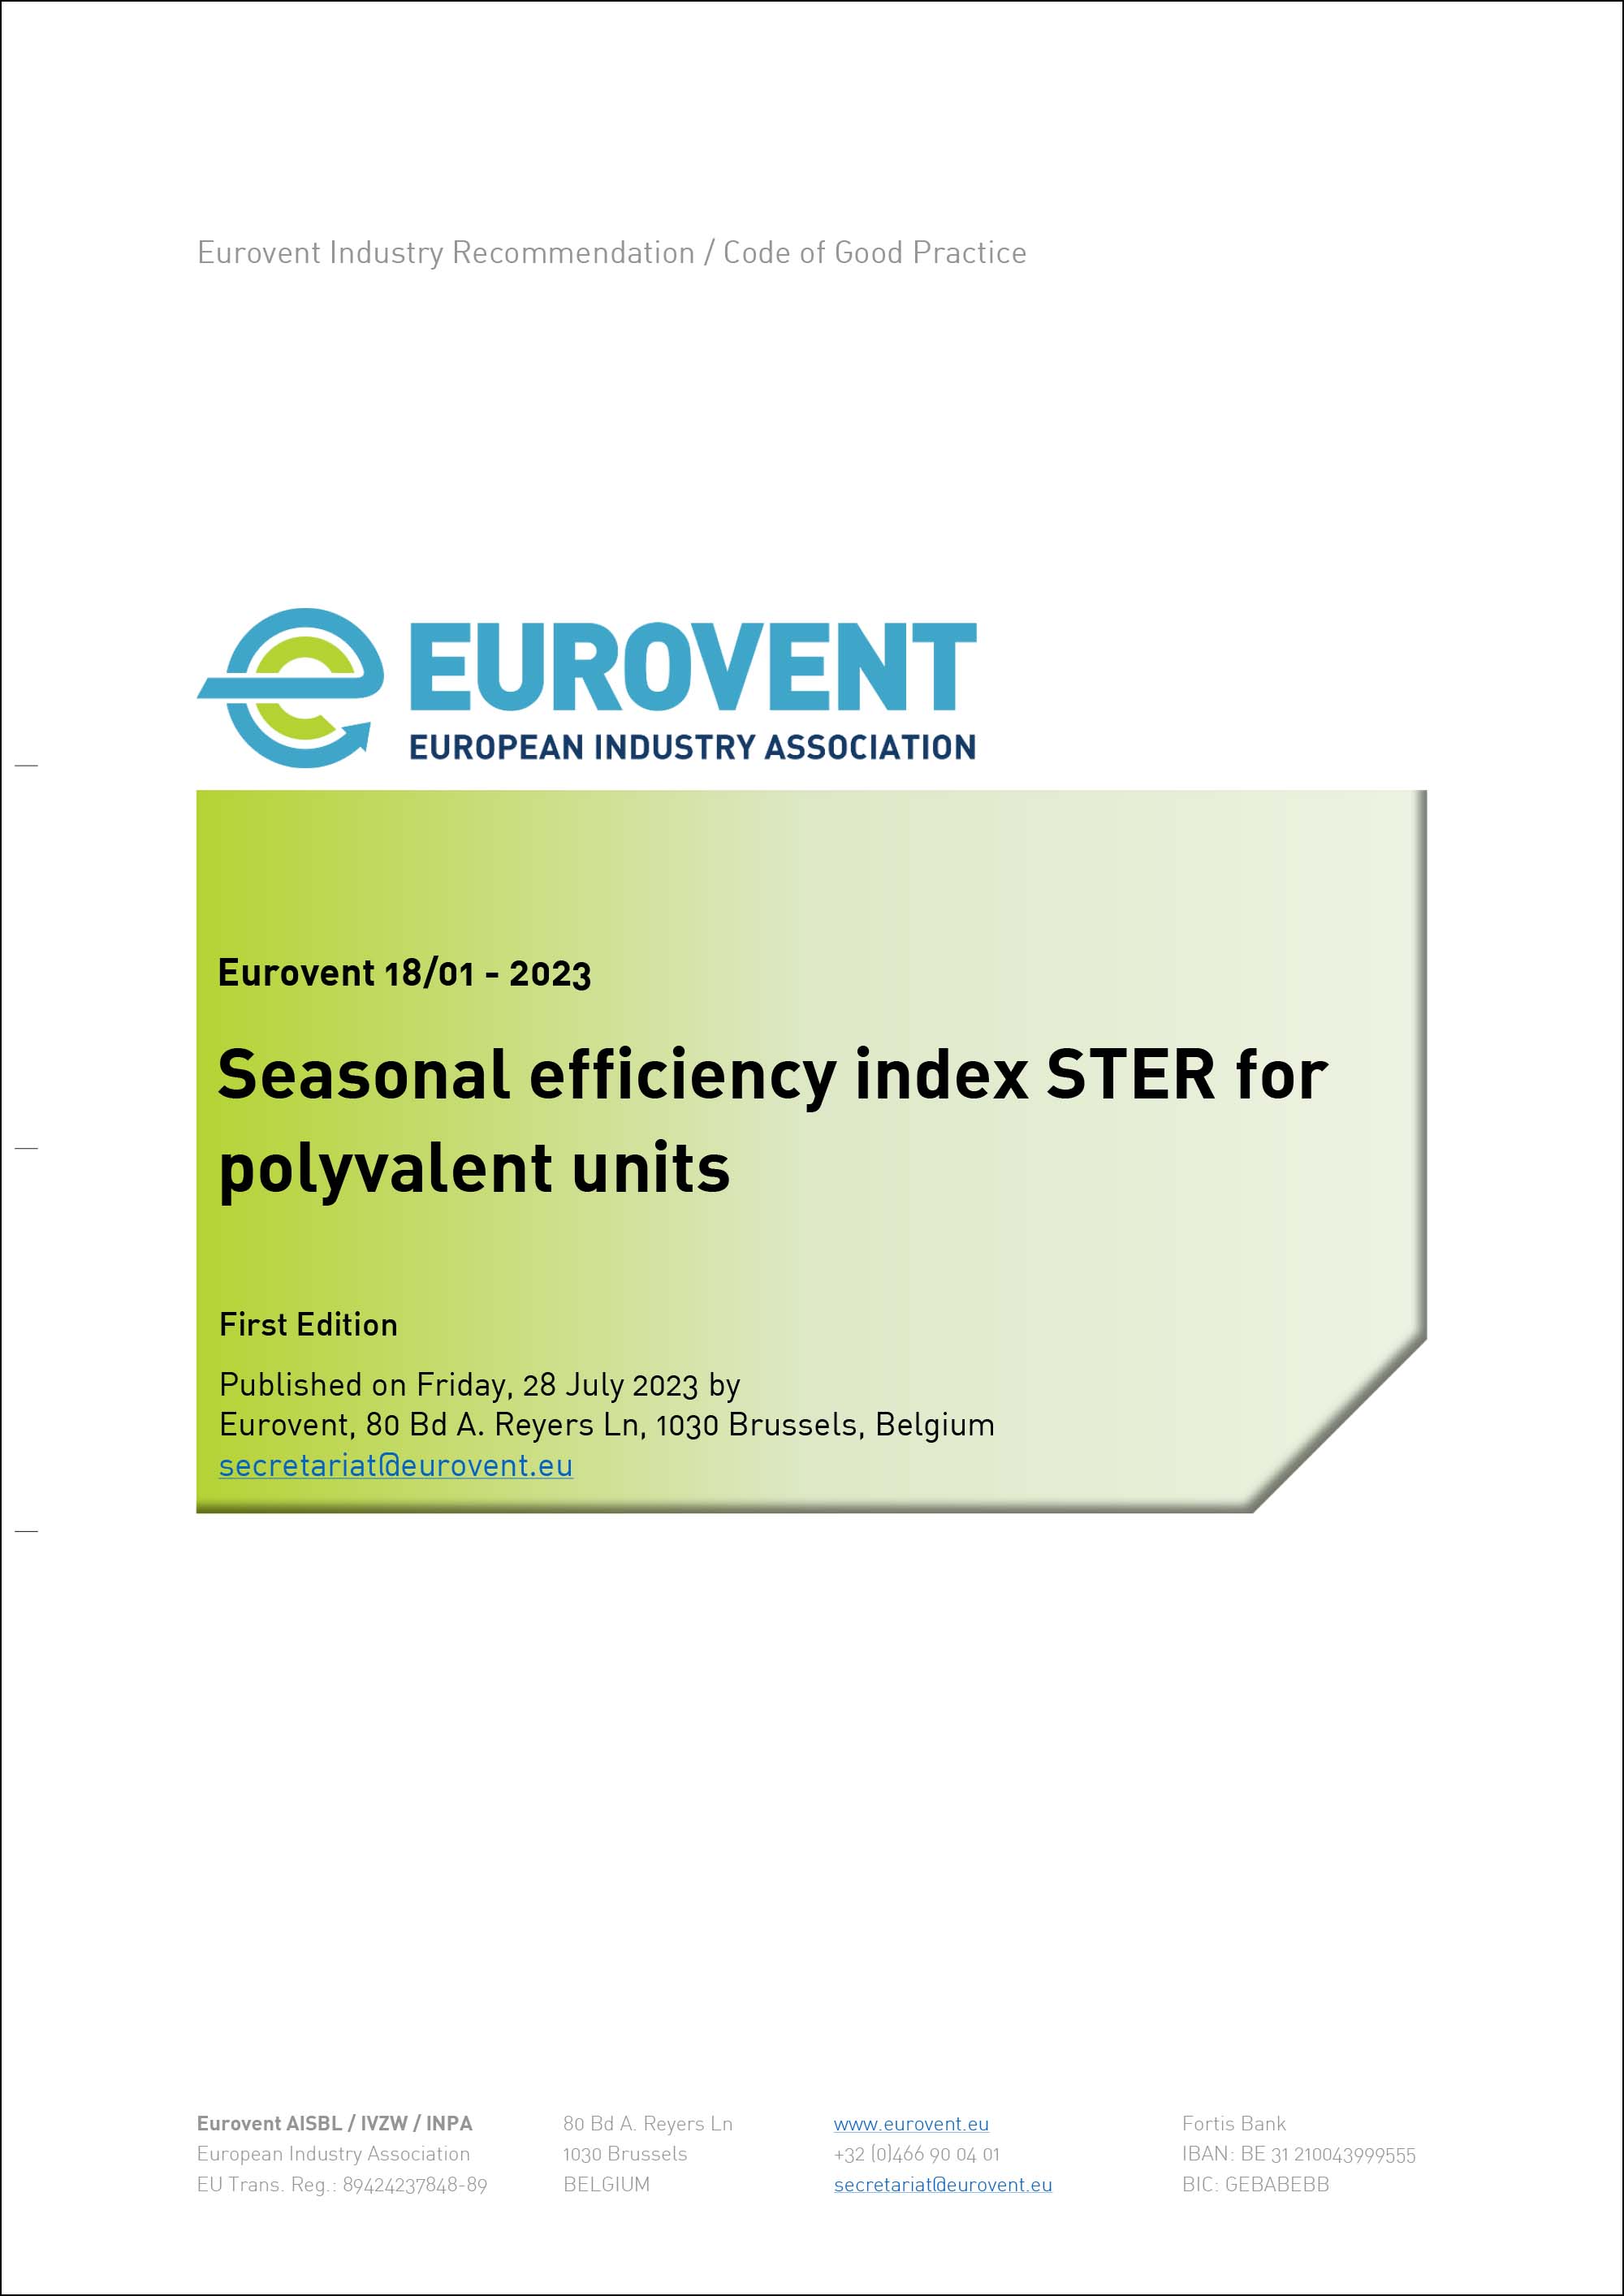 Eurovent REC 18-01 - Seasonal efficiency index STER for polyvalent units